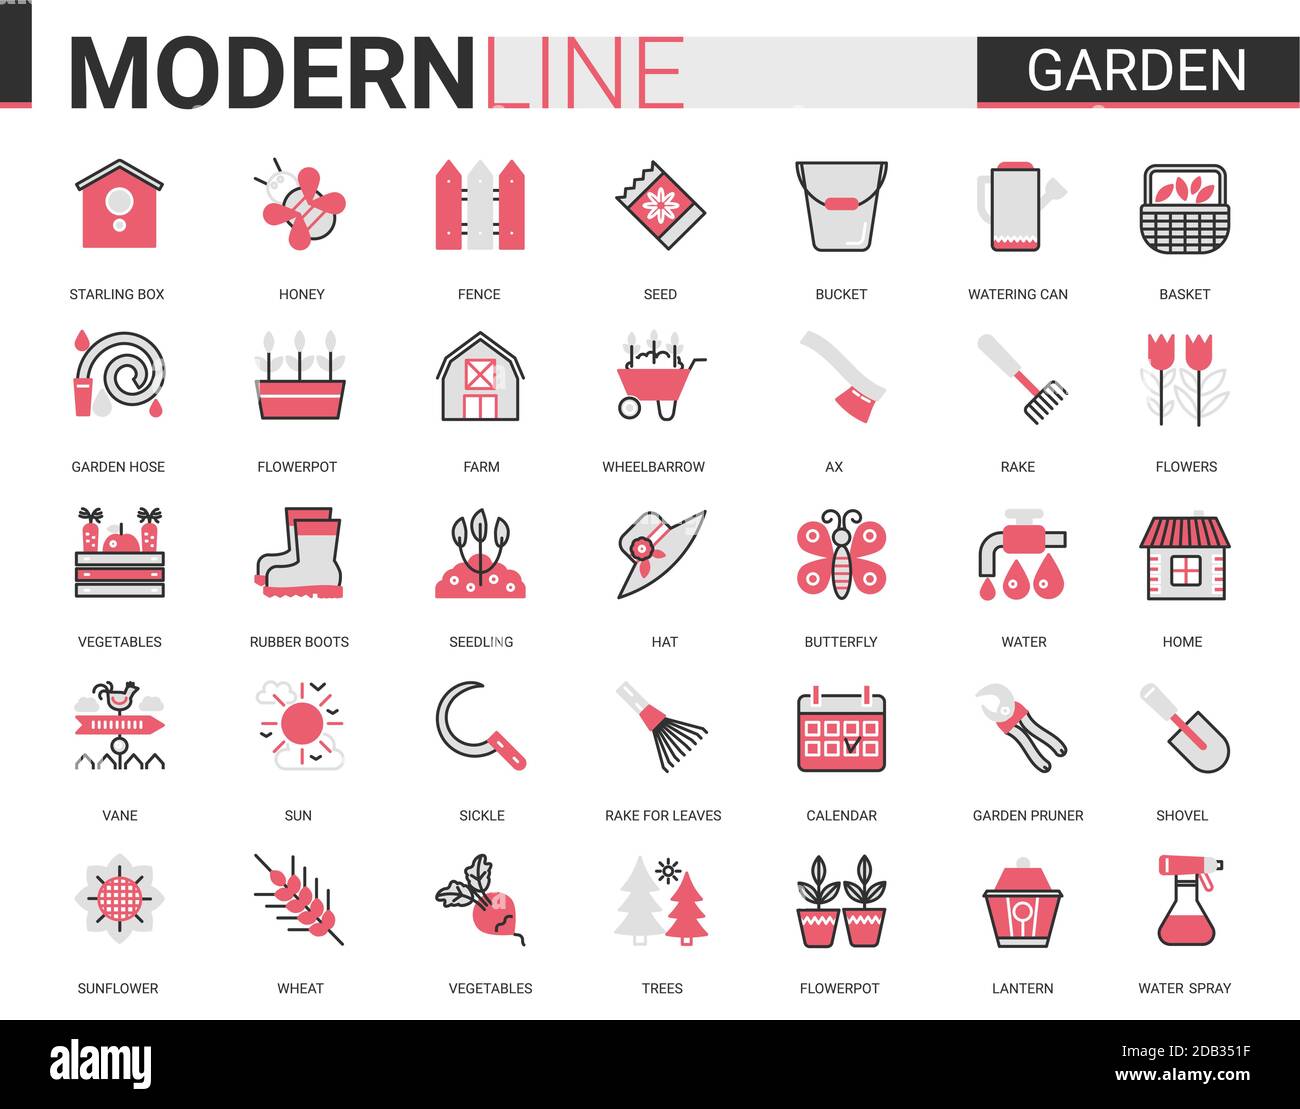 Garden farm tool icon vector illustration set. Red black thin flat line gardening or landscaping accessories for gardener farmer worker, agriculture equipment collection of outline pictogram symbols Stock Vector